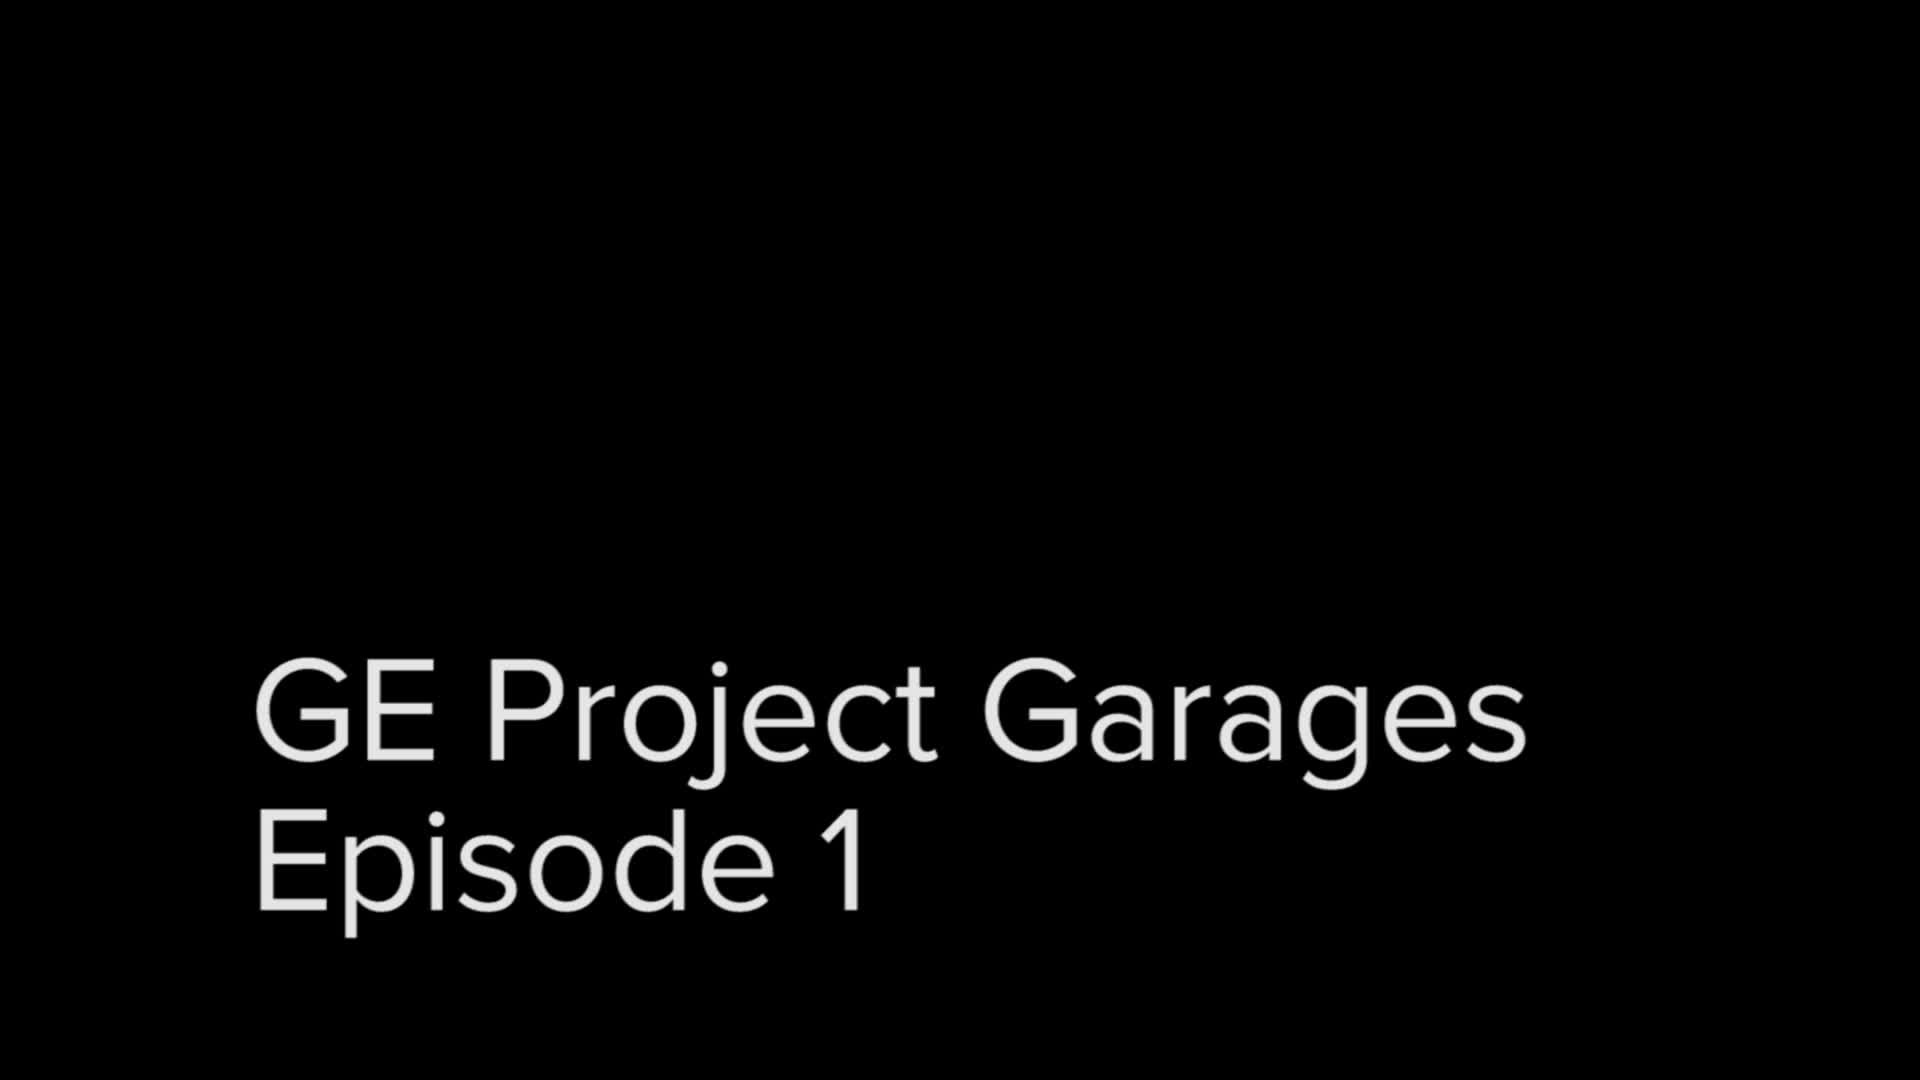 GE Project Garages